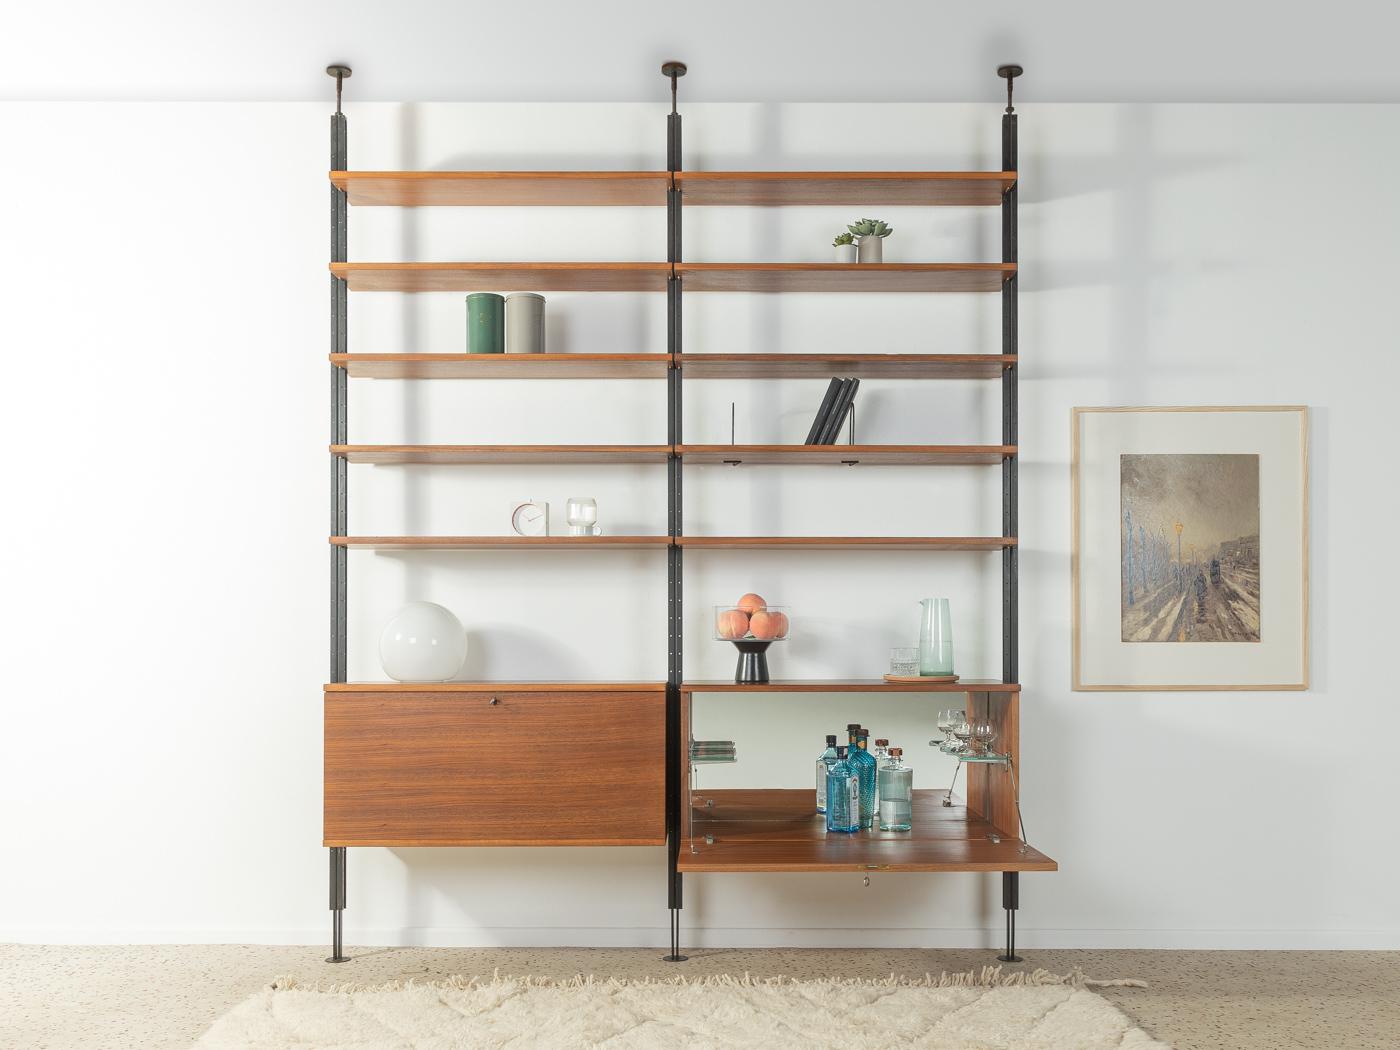 Rare clamping column shelf from the 1960s in walnut veneer. The system was designed by austro-american architect Richard Neutra and was produced in a limited edition for some of his realized residential buildings. The shelf consists of three